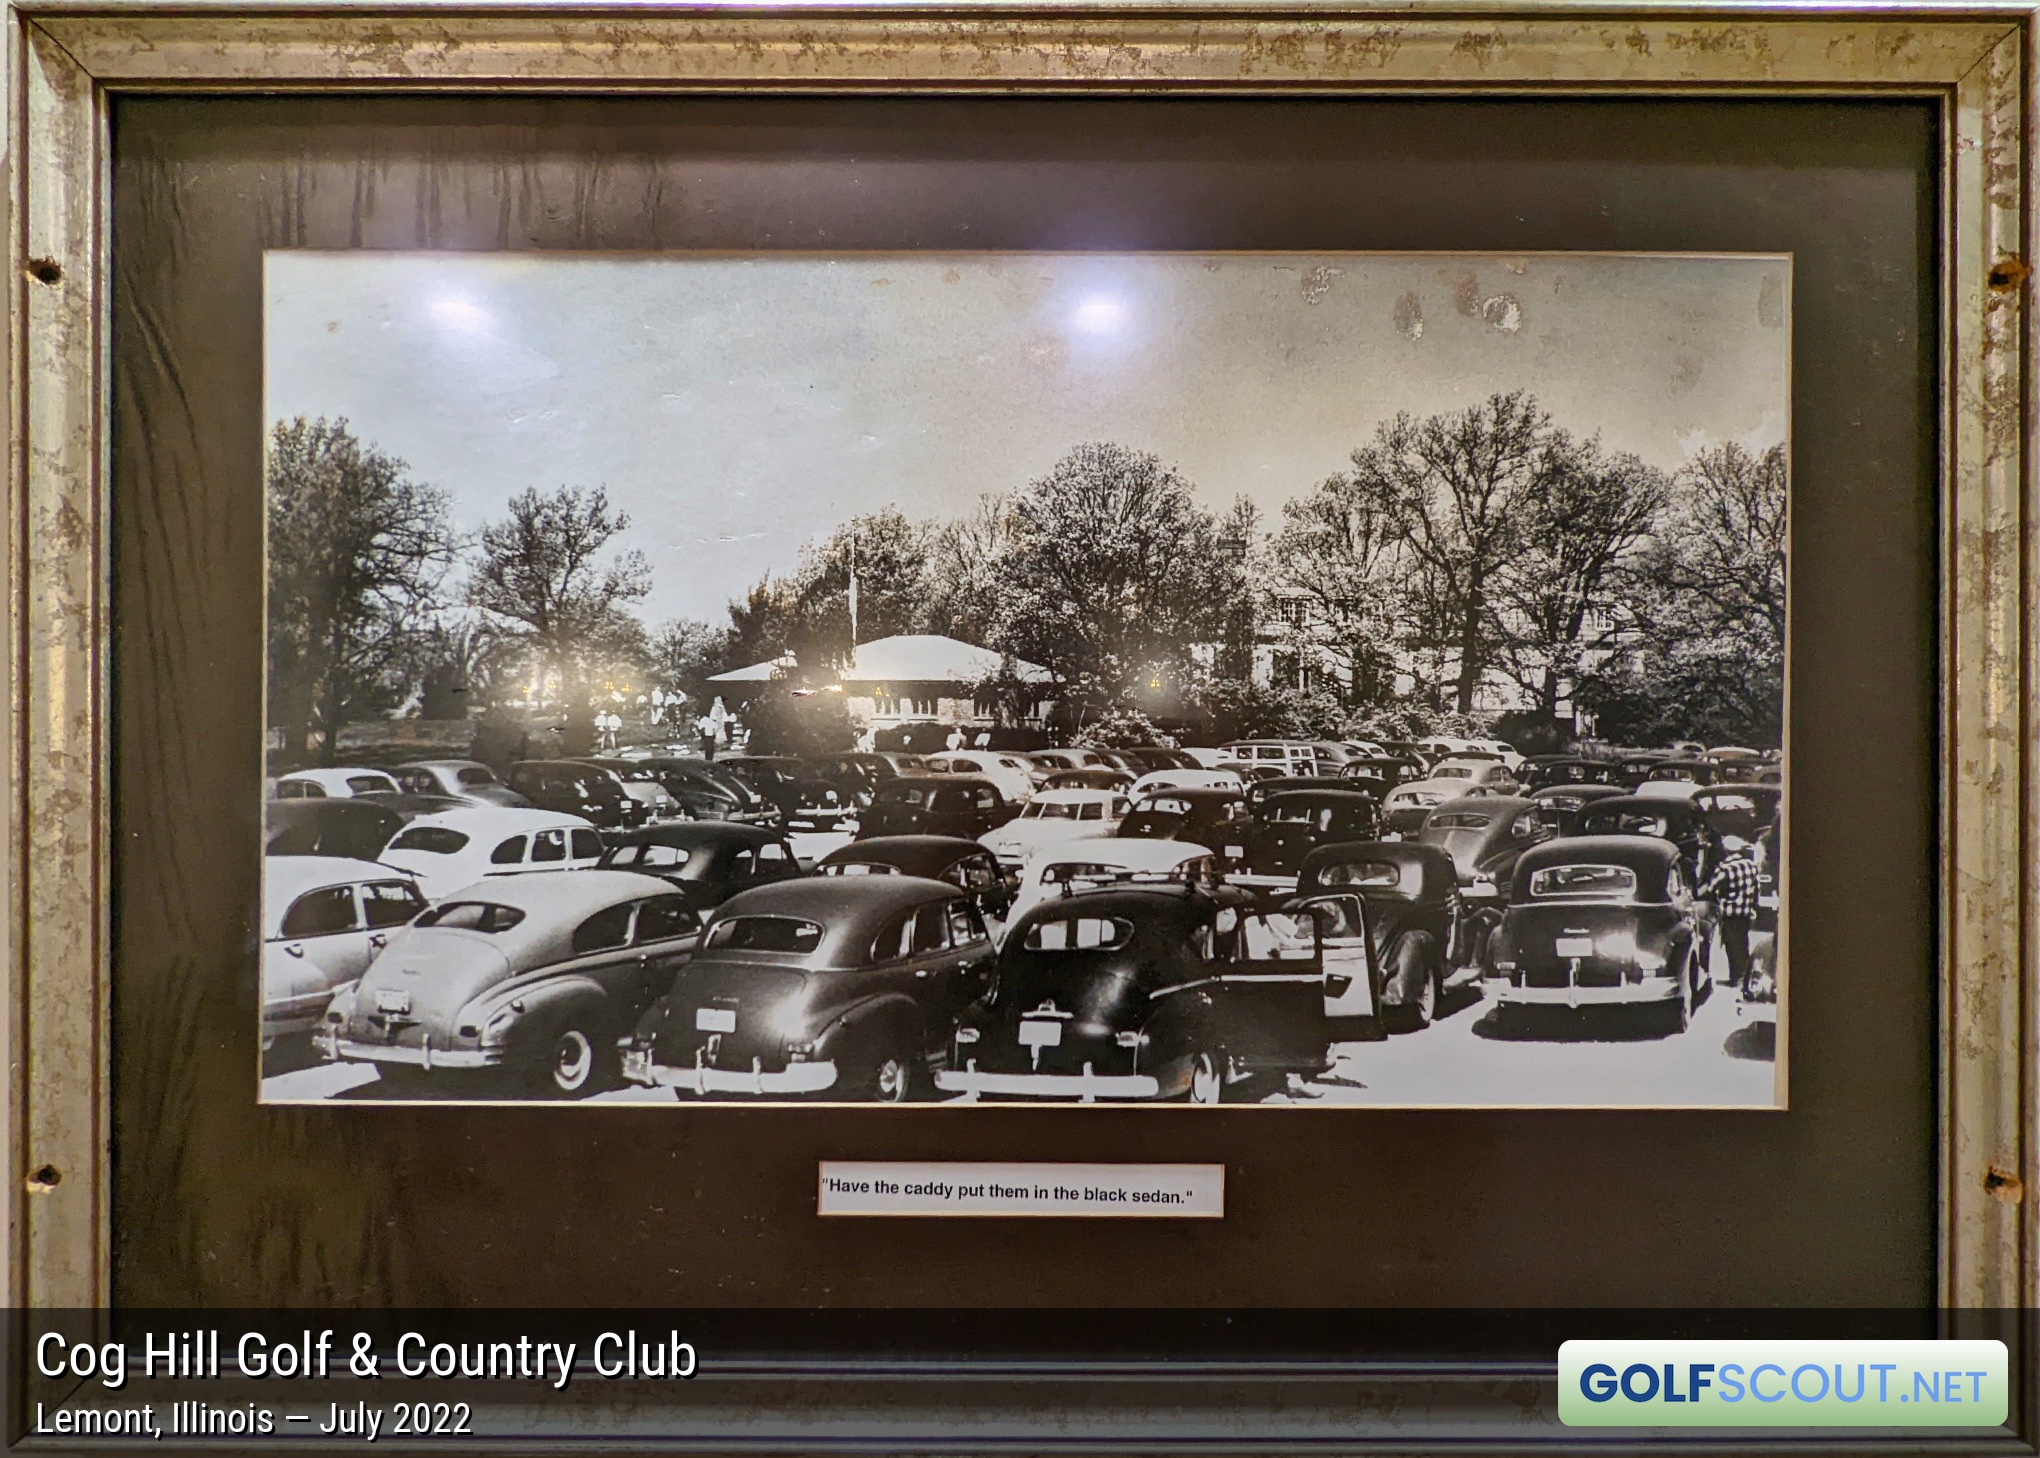 Miscellaneous photo of Cog Hill Course #4 - Dubsdread in Palos Park, Illinois. "Have the caddy put them in the black sedan." This framed photo is in the basement of the main clubhouse.